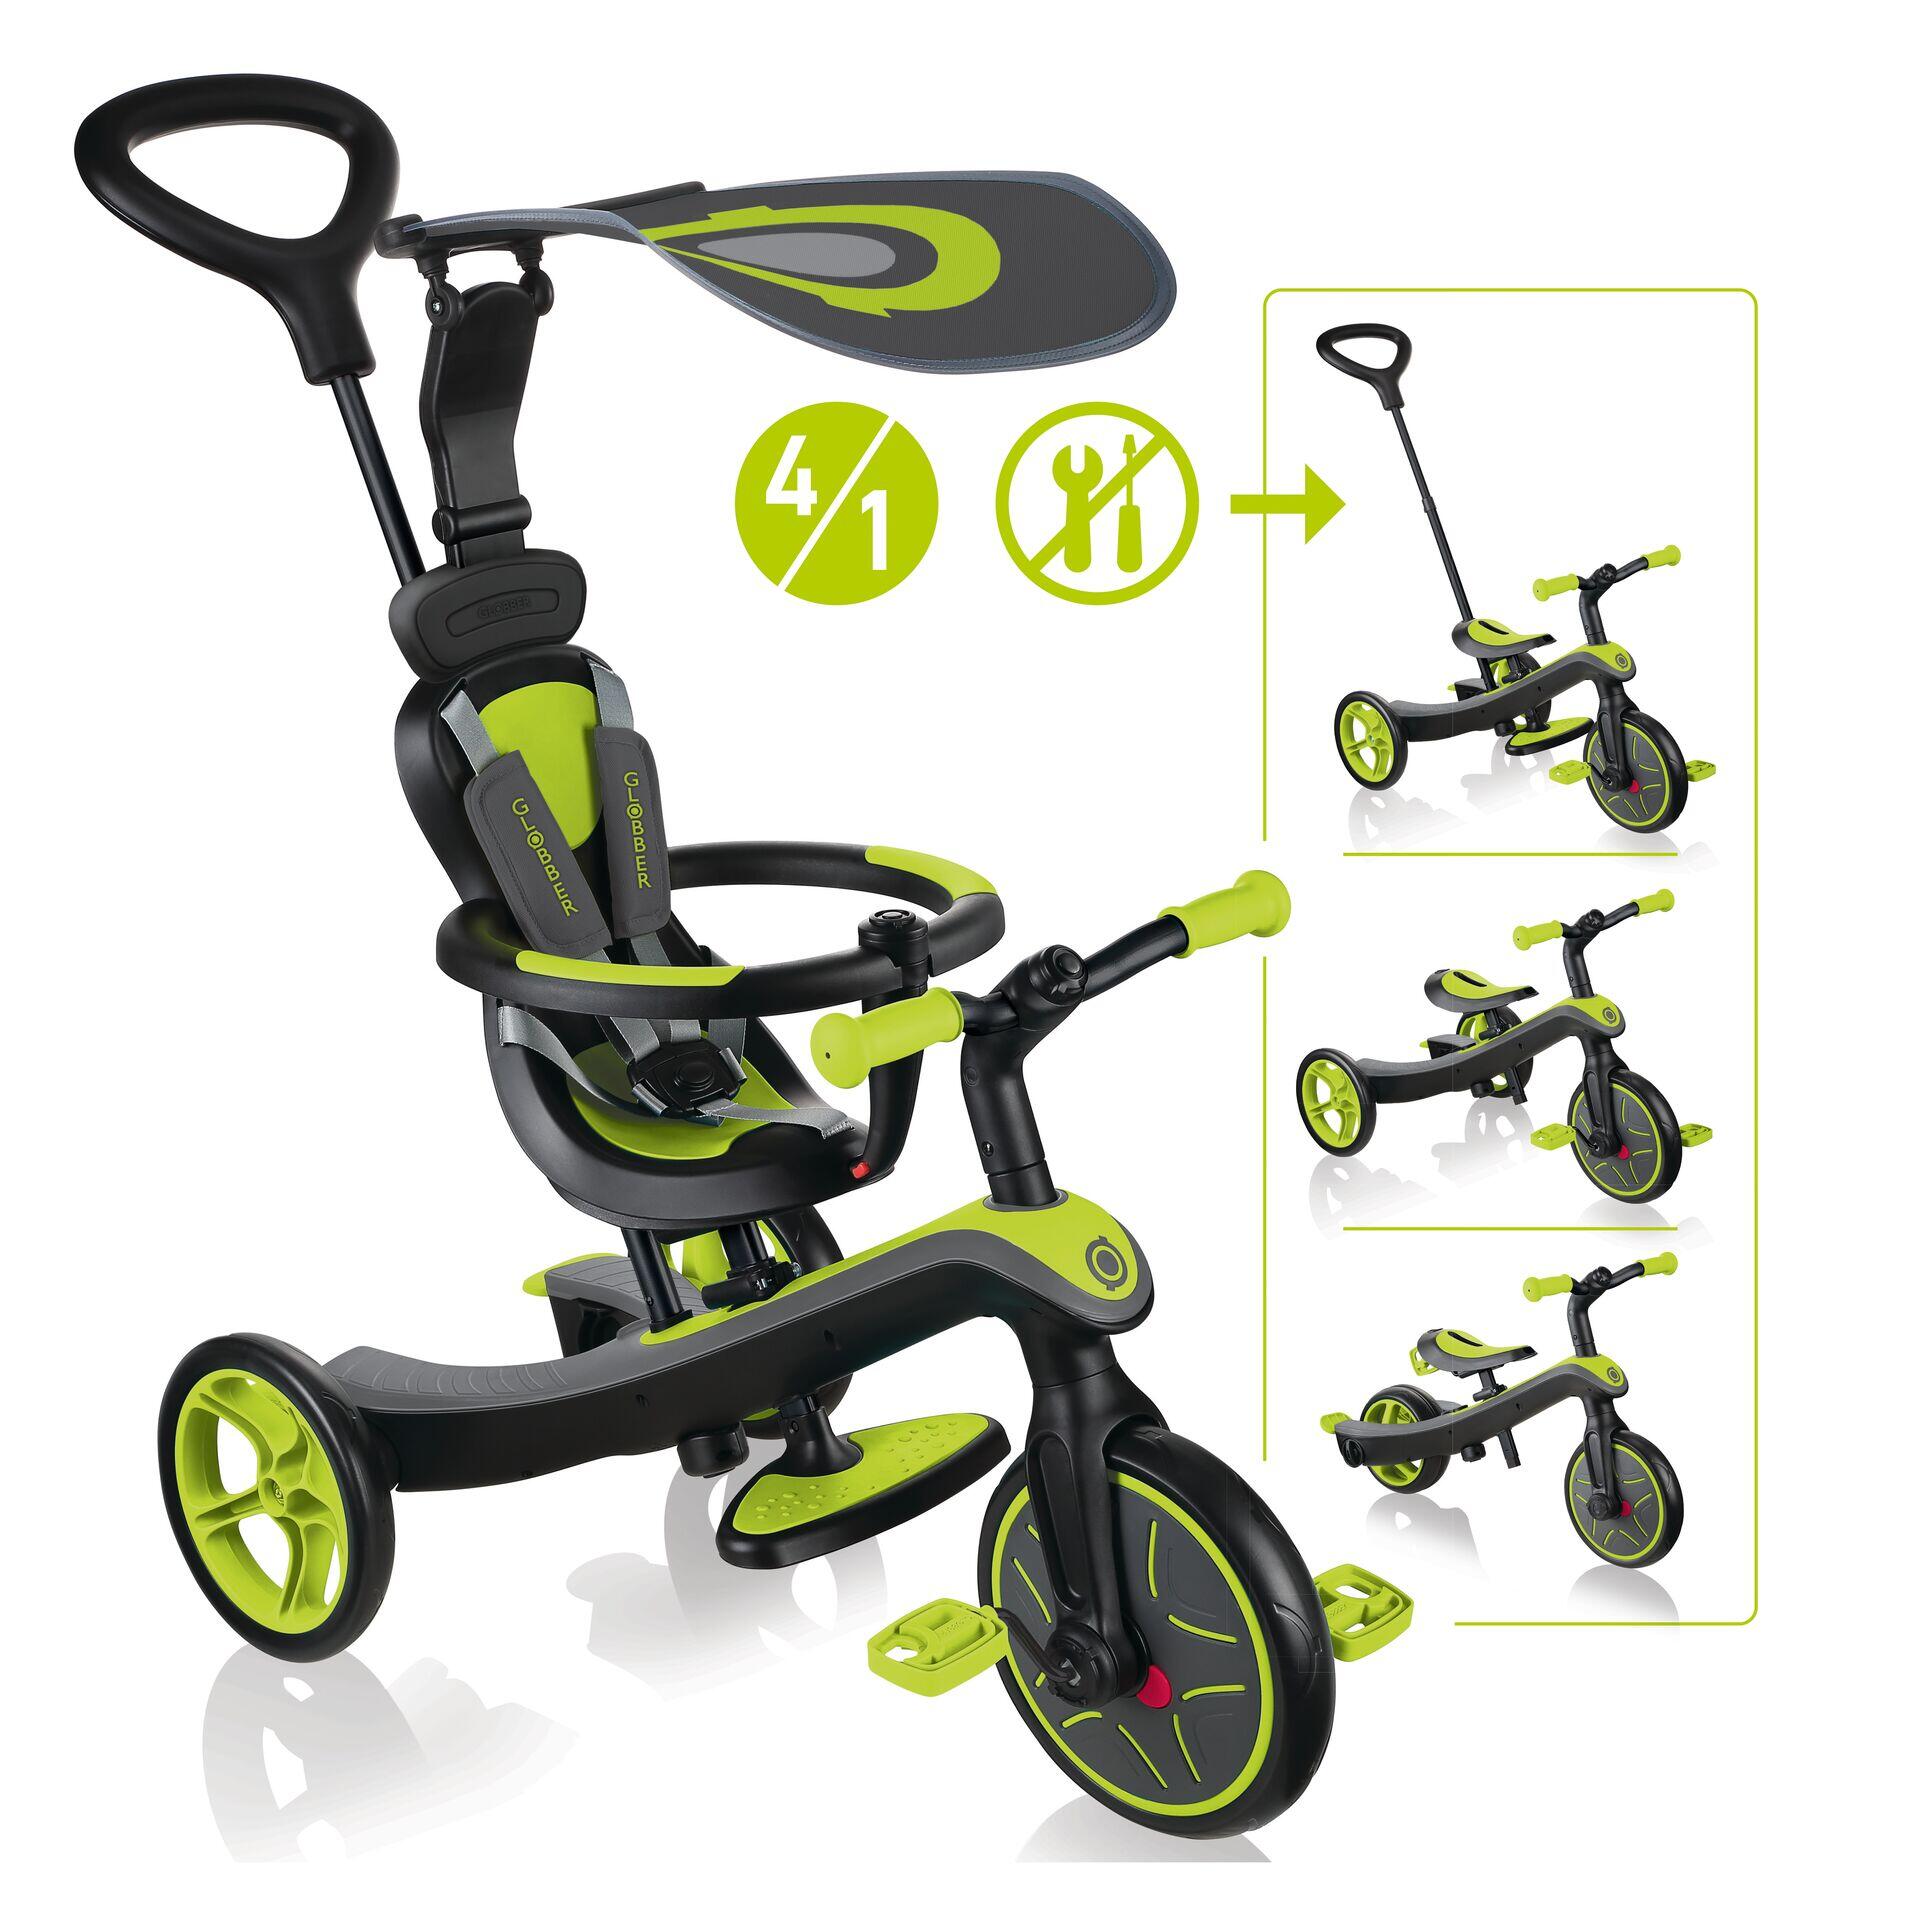 Globber Explorer Trike 4 in 1 with Parent Handle - Lime Green 1/7